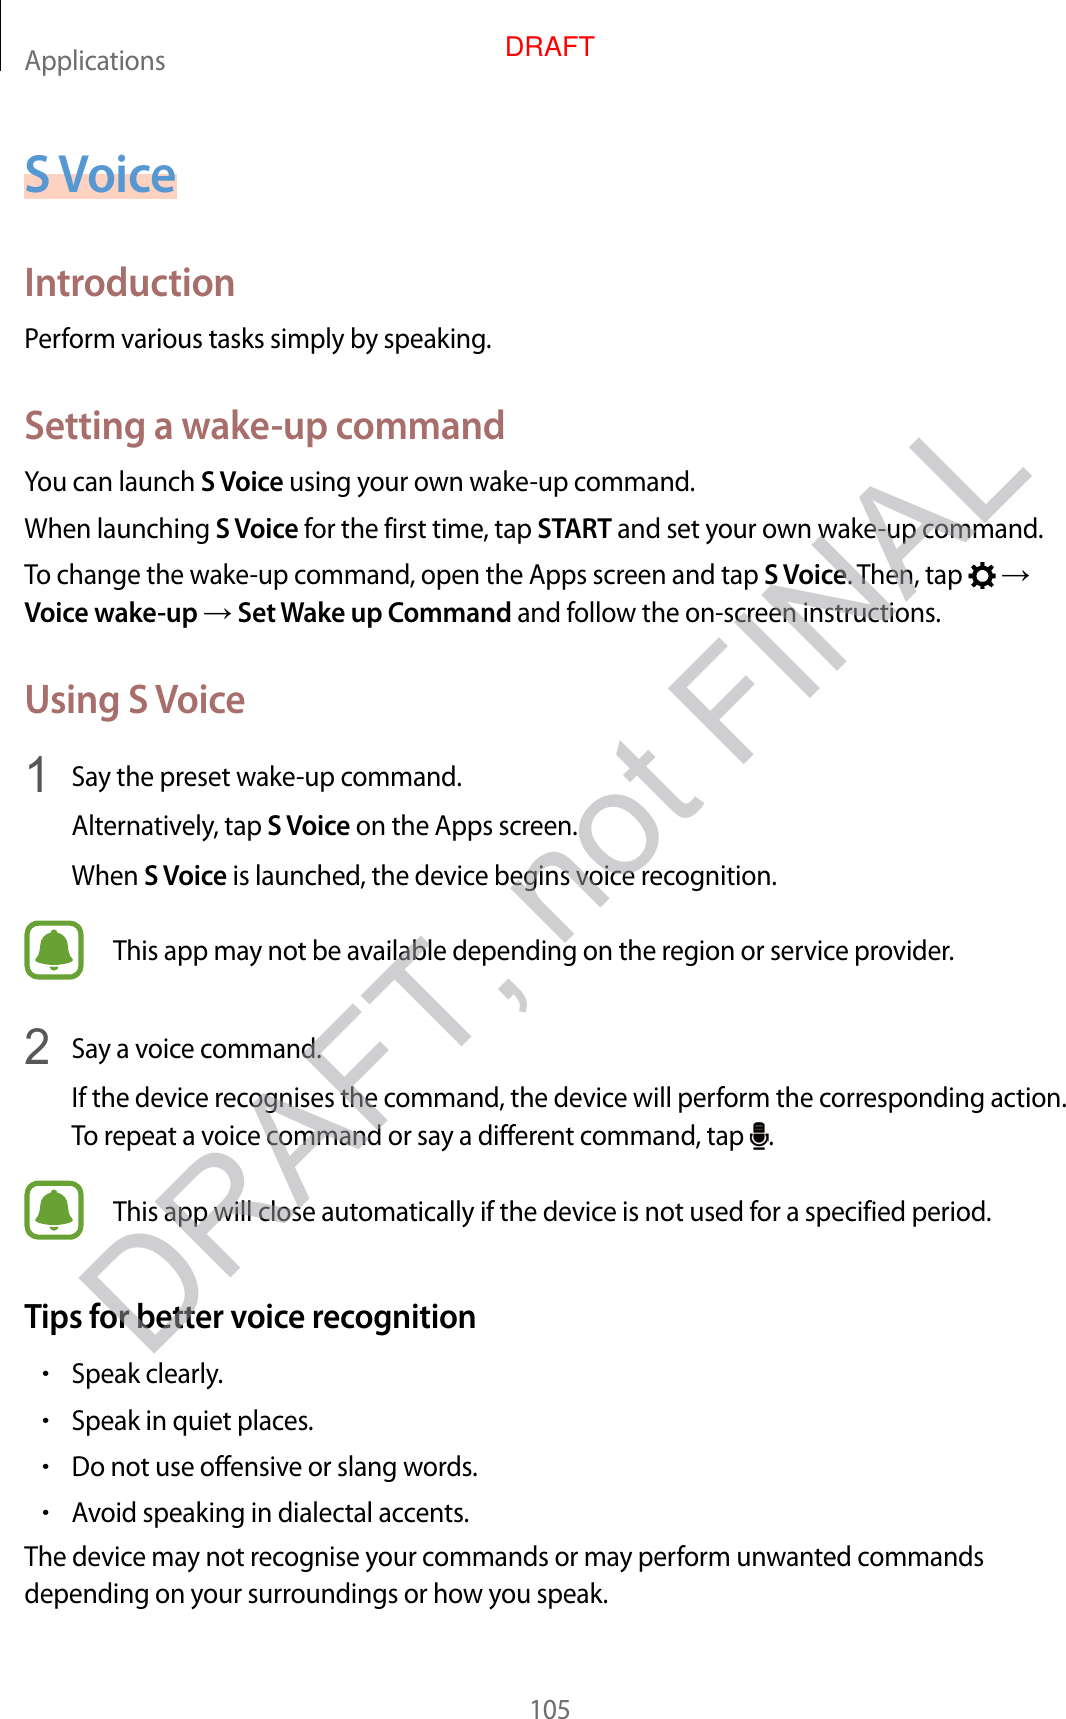 Applications105S VoiceIntroductionPerform various tasks simply by speaking.Setting a wake-up commandYou can launch S Voice using your own wake-up command.When launching S Voice for the first time, tap START and set your own wake-up command.To change the wake-up command, open the Apps screen and tap S Voice. Then, tap    Voice wake-up  Set Wake up Command and follow the on-screen instructions.Using S Voice1  Say the preset wake-up command.Alternatively, tap S Voice on the Apps screen.When S Voice is launched, the device begins voice recognition.This app may not be available depending on the region or service provider.2  Say a voice command.If the device recognises the command, the device will perform the corresponding action. To repeat a voice command or say a different command, tap  .This app will close automatically if the device is not used for a specified period.Tips for better voice recognition•Speak clearly.•Speak in quiet places.•Do not use offensive or slang words.•Avoid speaking in dialectal accents.The device may not recognise your commands or may perform unwanted commands depending on your surroundings or how you speak.DRAFT, not FINALDRAFT